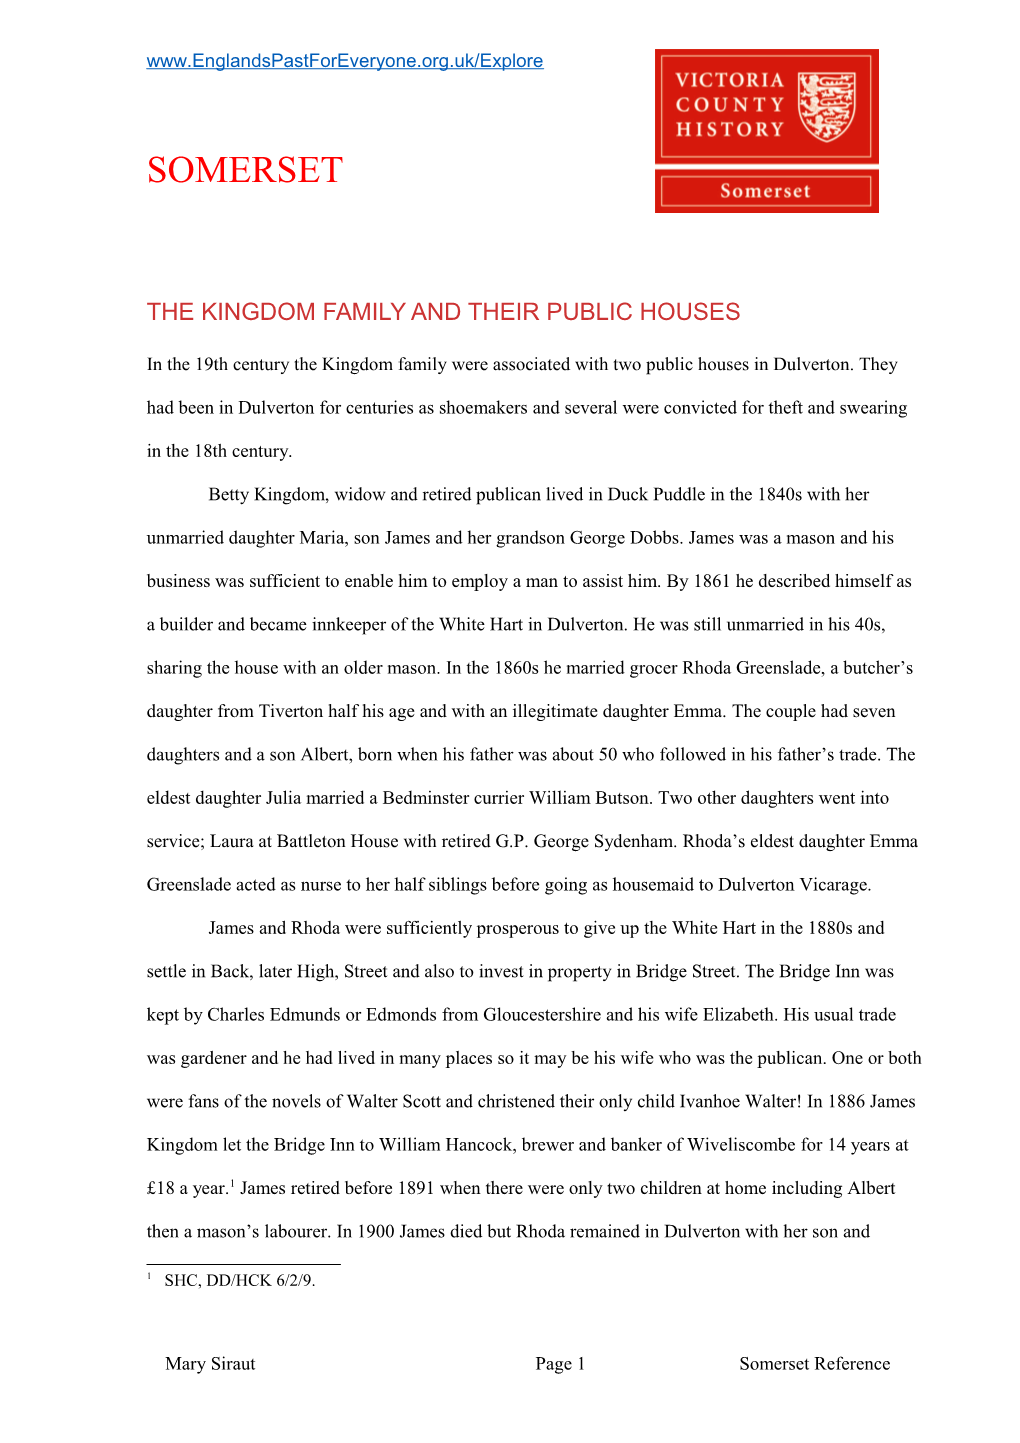 The Kingdom Family and Their Public Houses